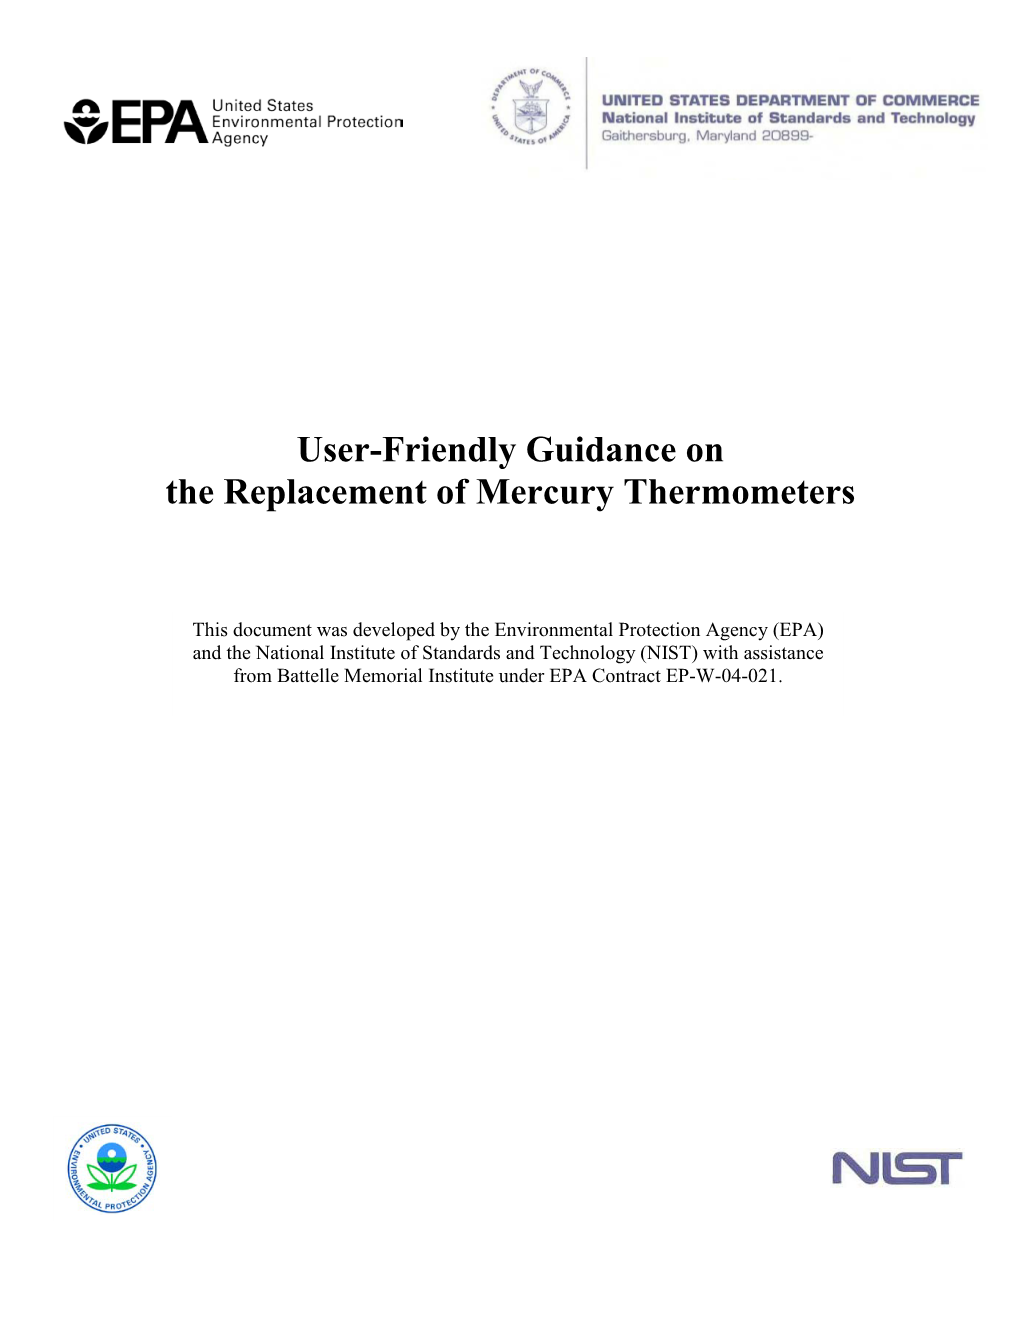 User-Friendly Guidance on the Replacement of Mercury Thermometers